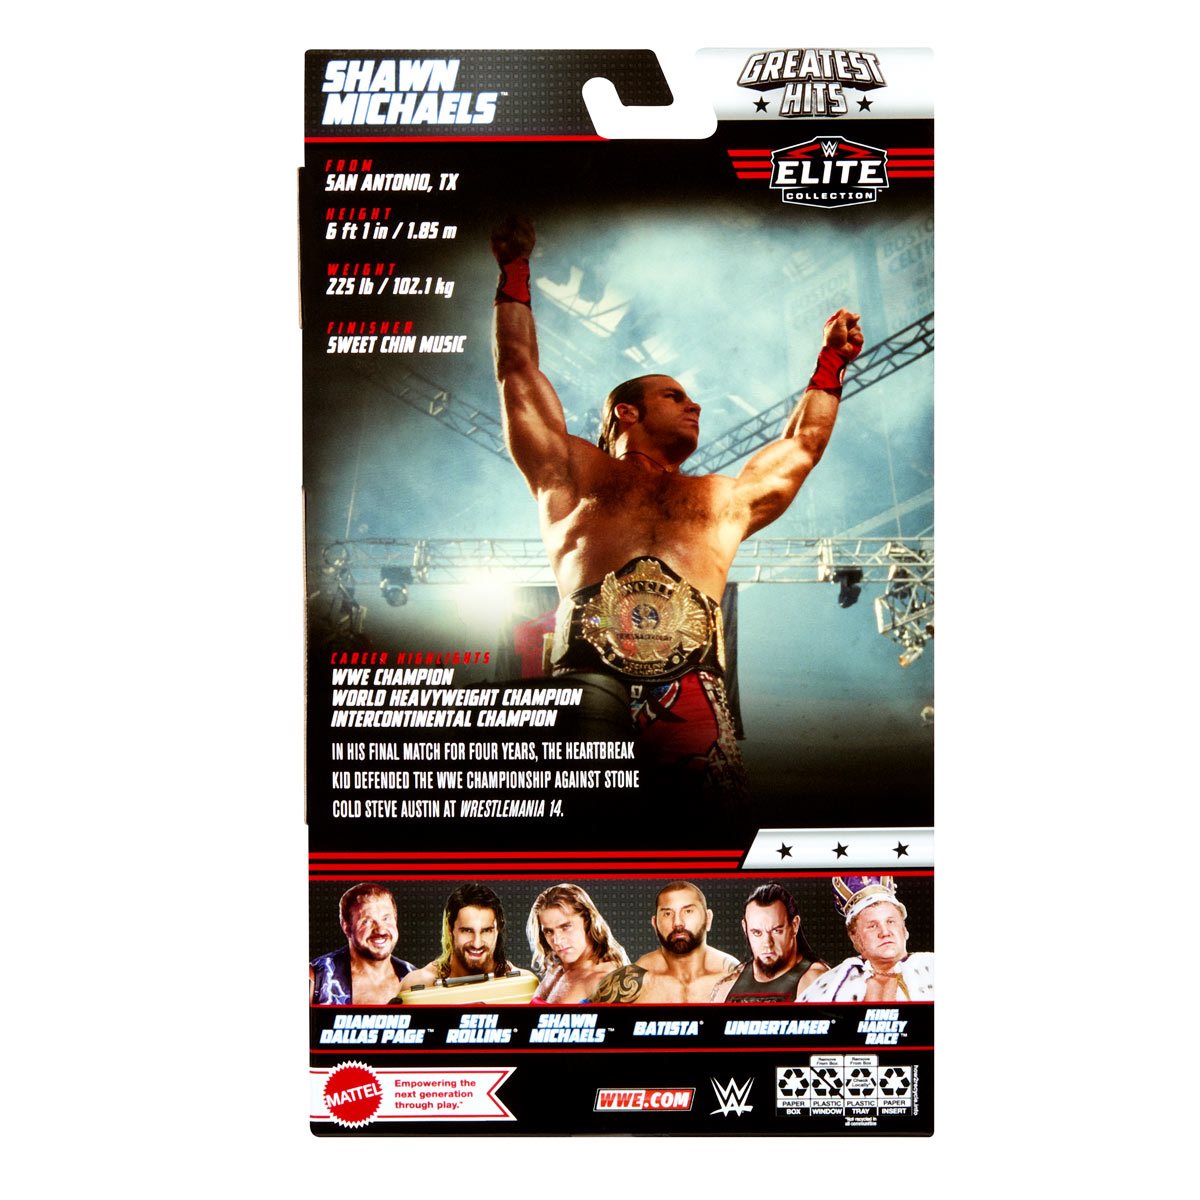 WWE Elite Collection Greatest Hits Shawn Michaels